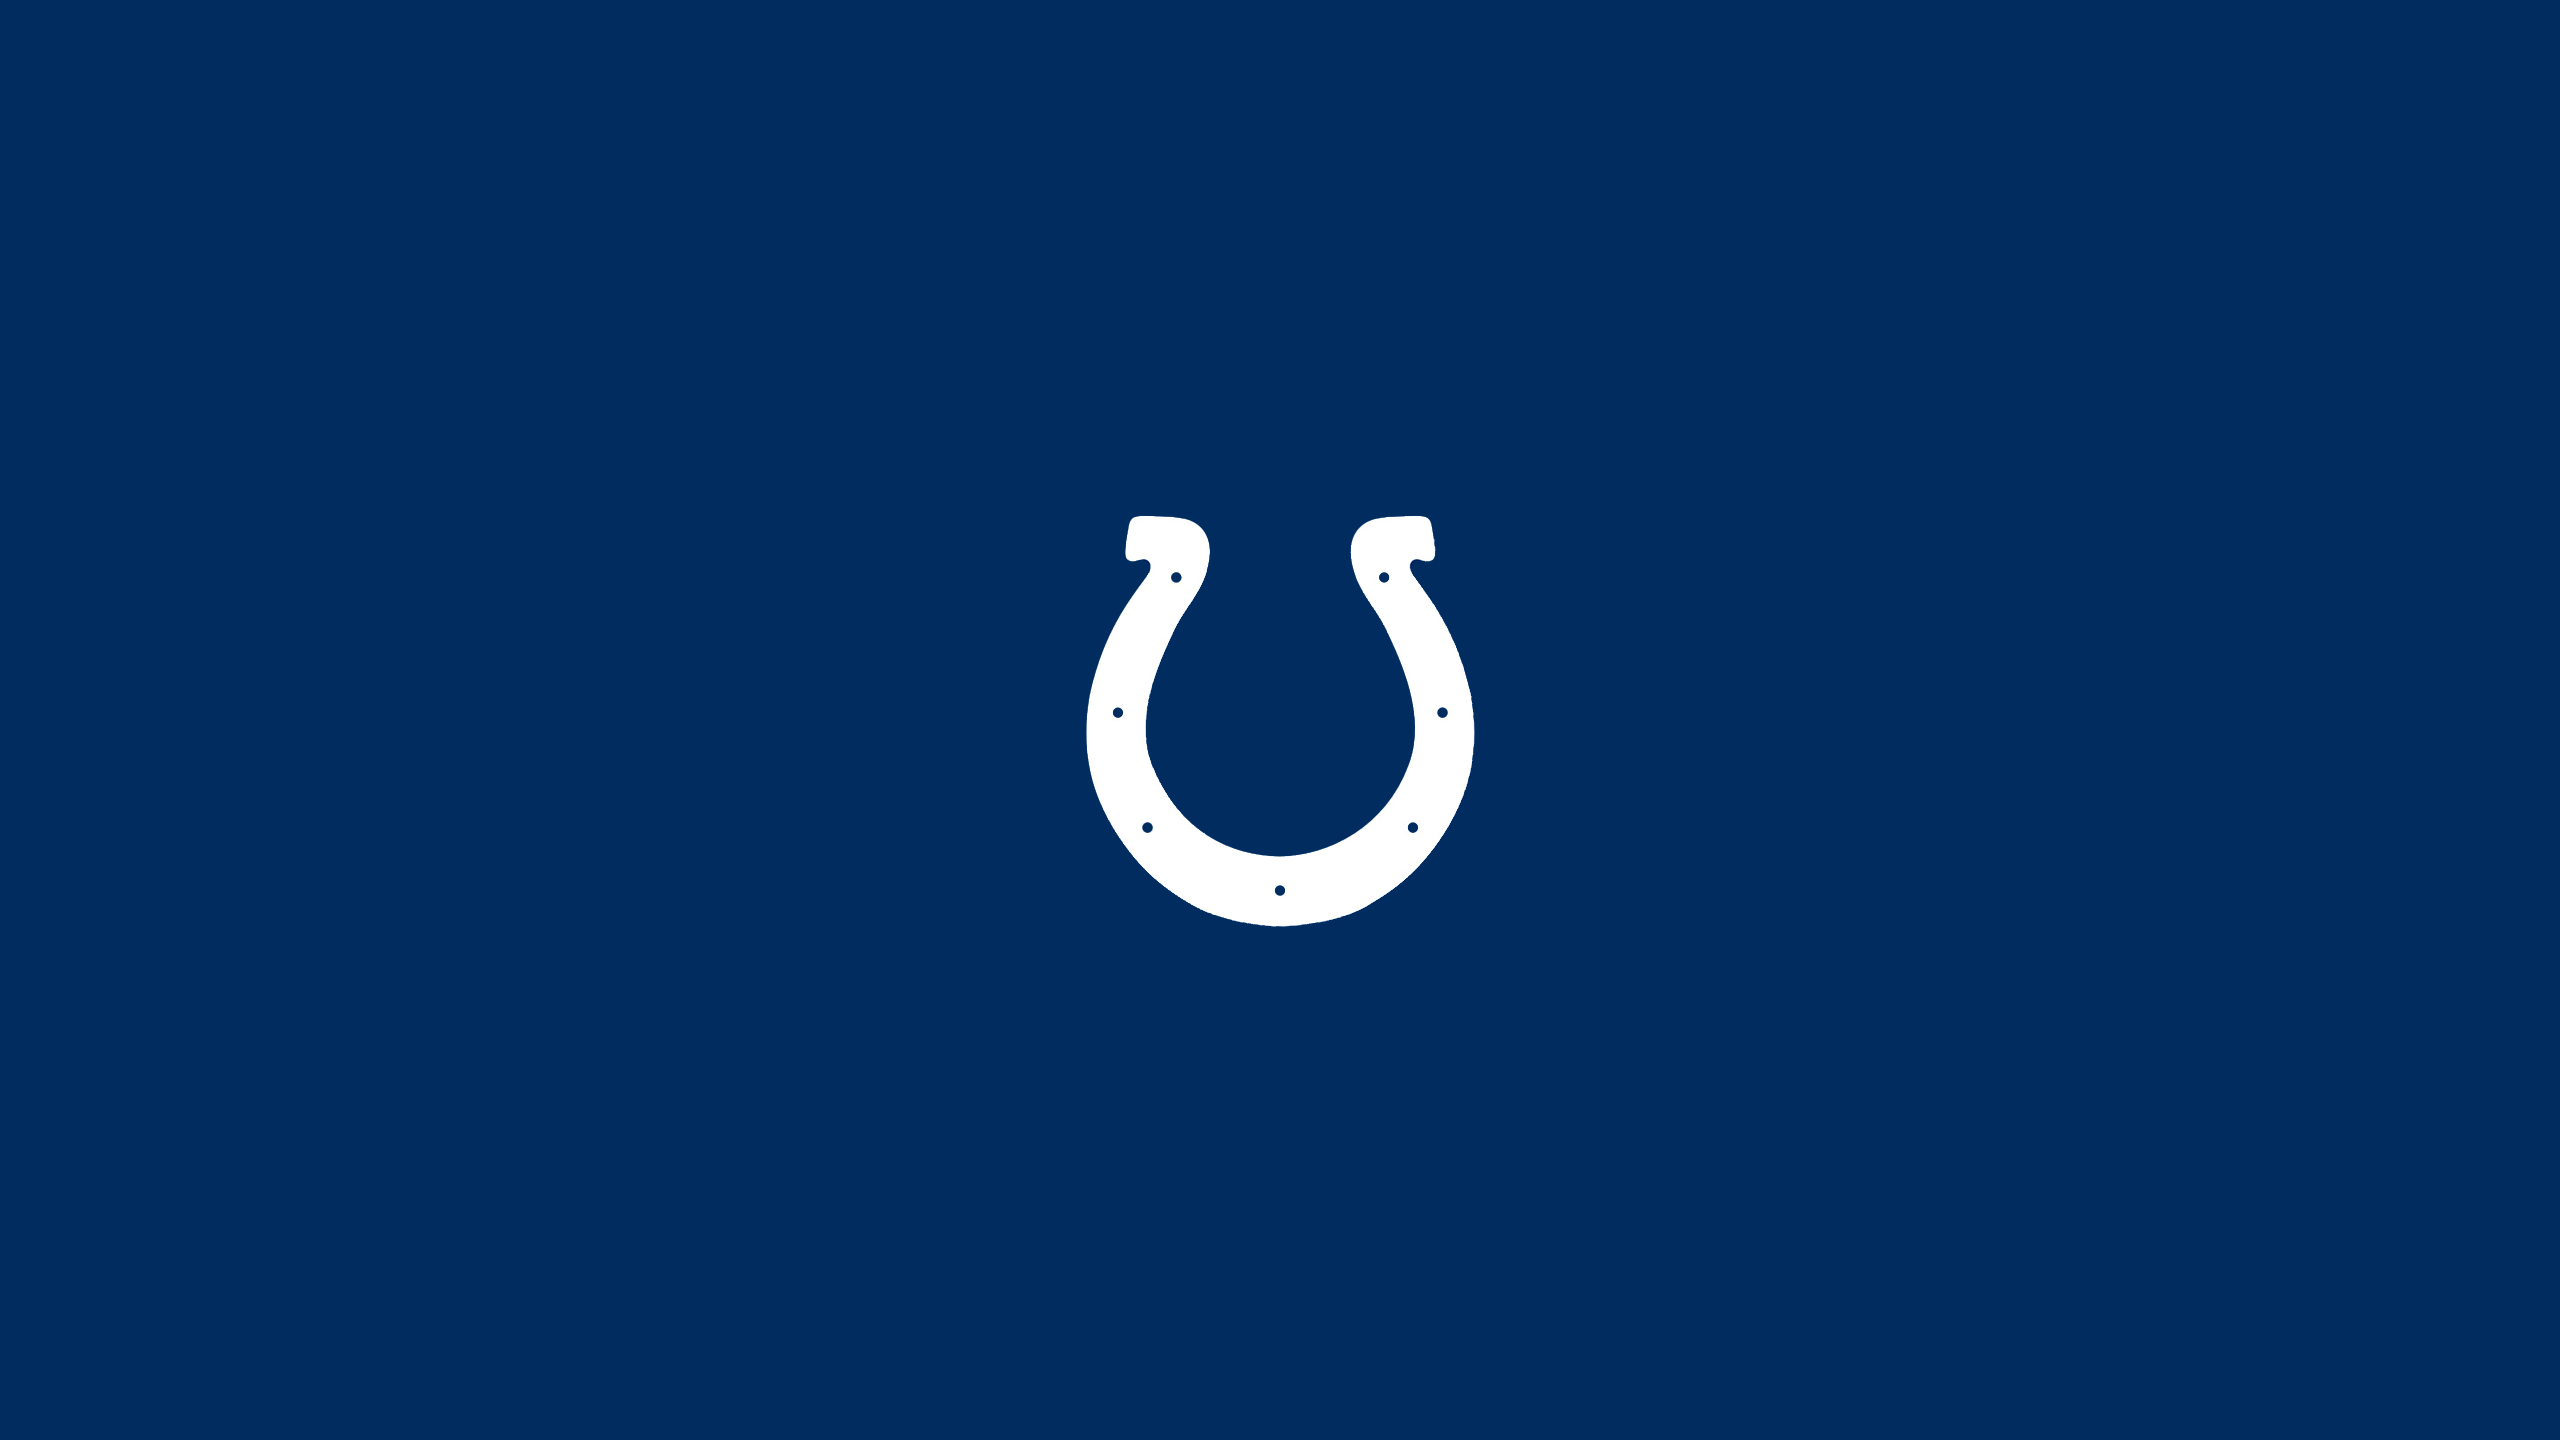 Indianapolis Colts - NFL - Square Bettor